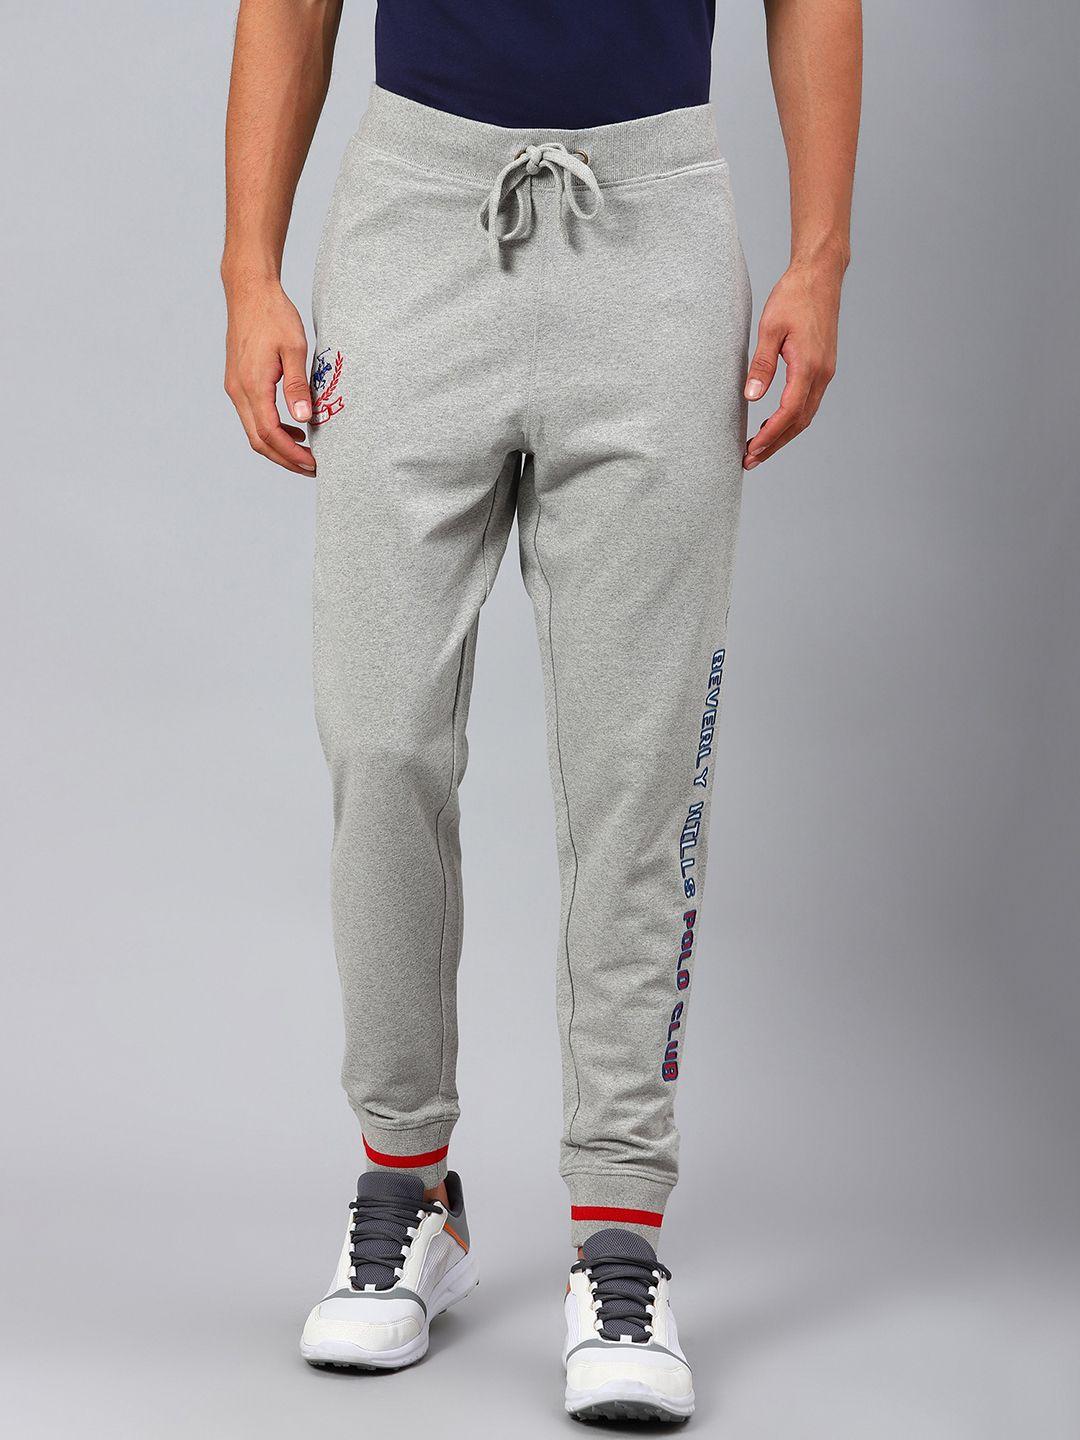 beverly hills polo club men grey solid cotton joggers